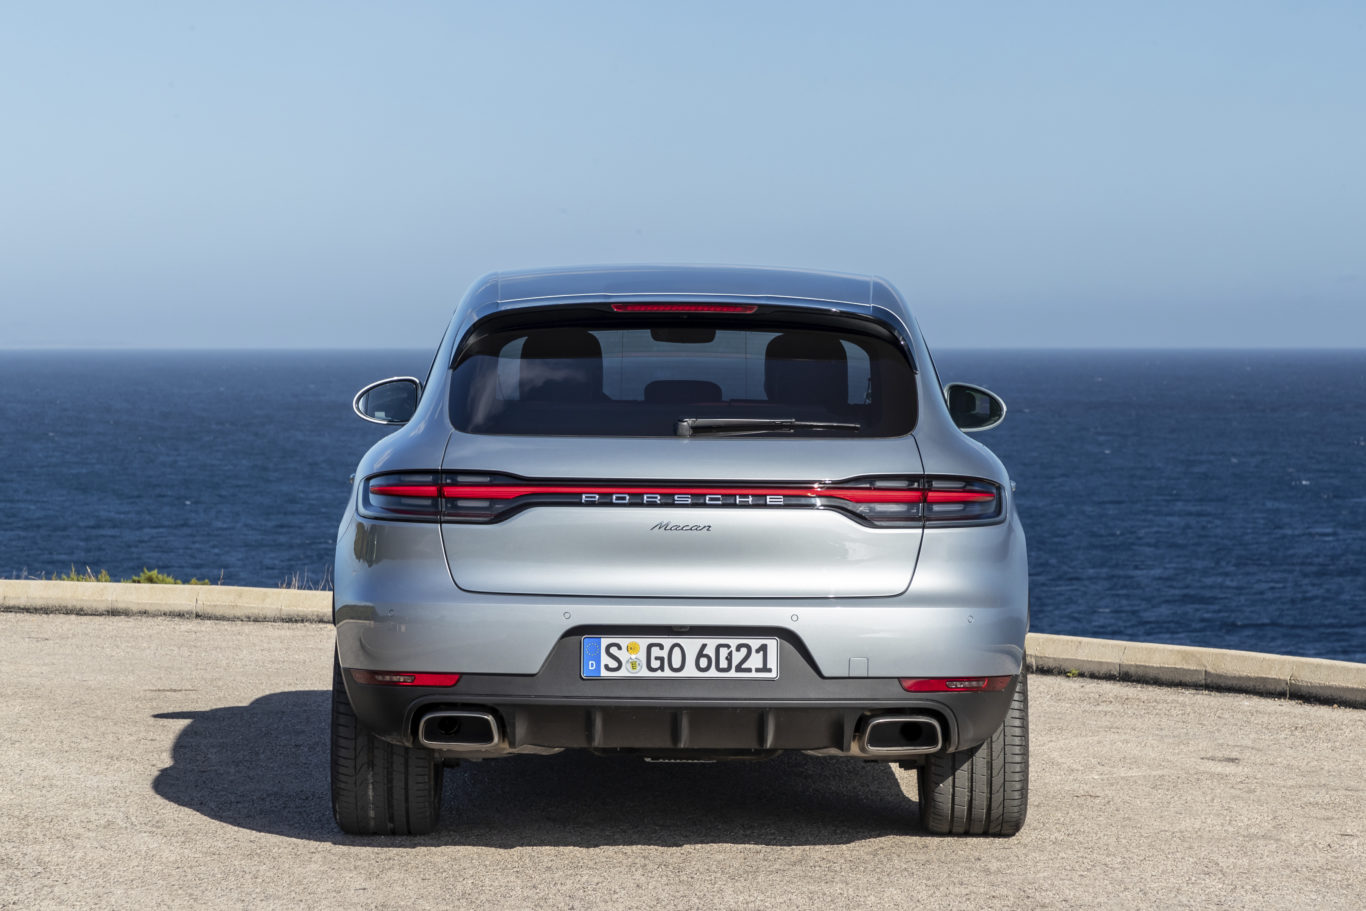 The full-width rear light is the biggest change to the outside of the updated Macan